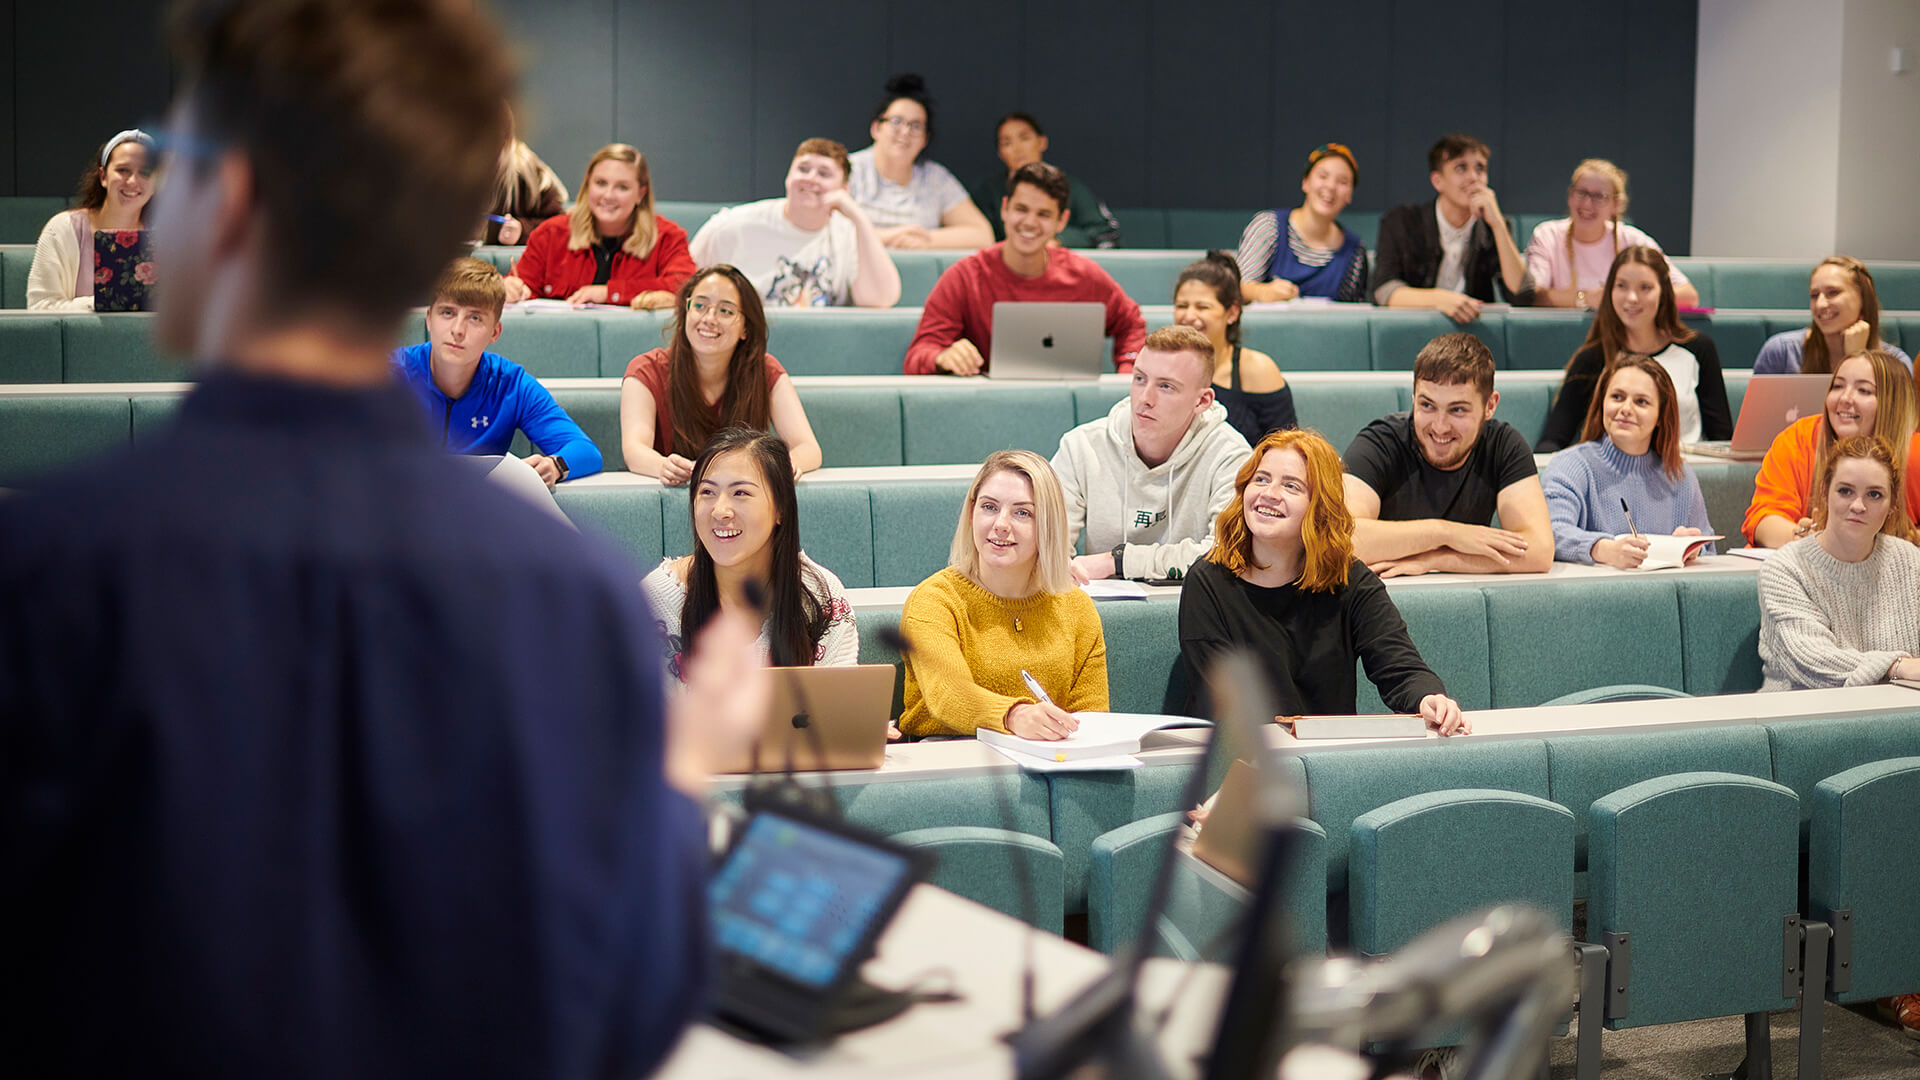 A lecturer addresses students in a Harvard-style lecture theatre.